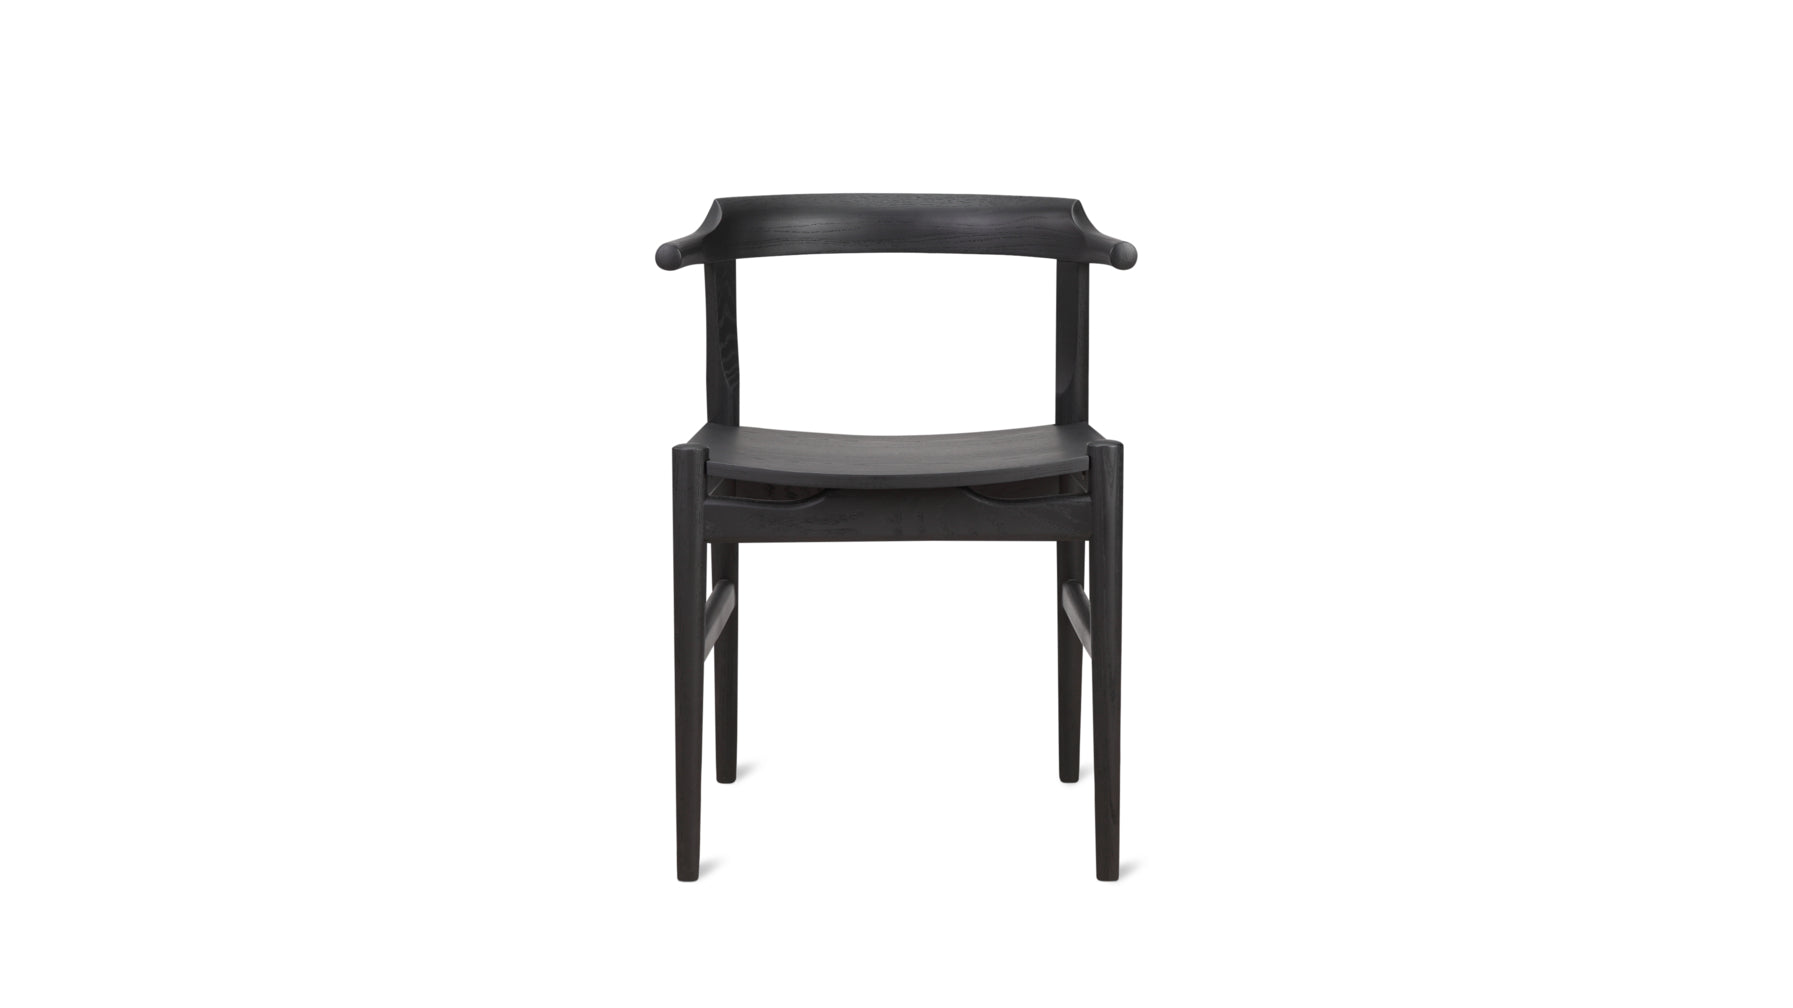 Tuck In Dining Chair, Black Ash, Wood Seat - Image 1